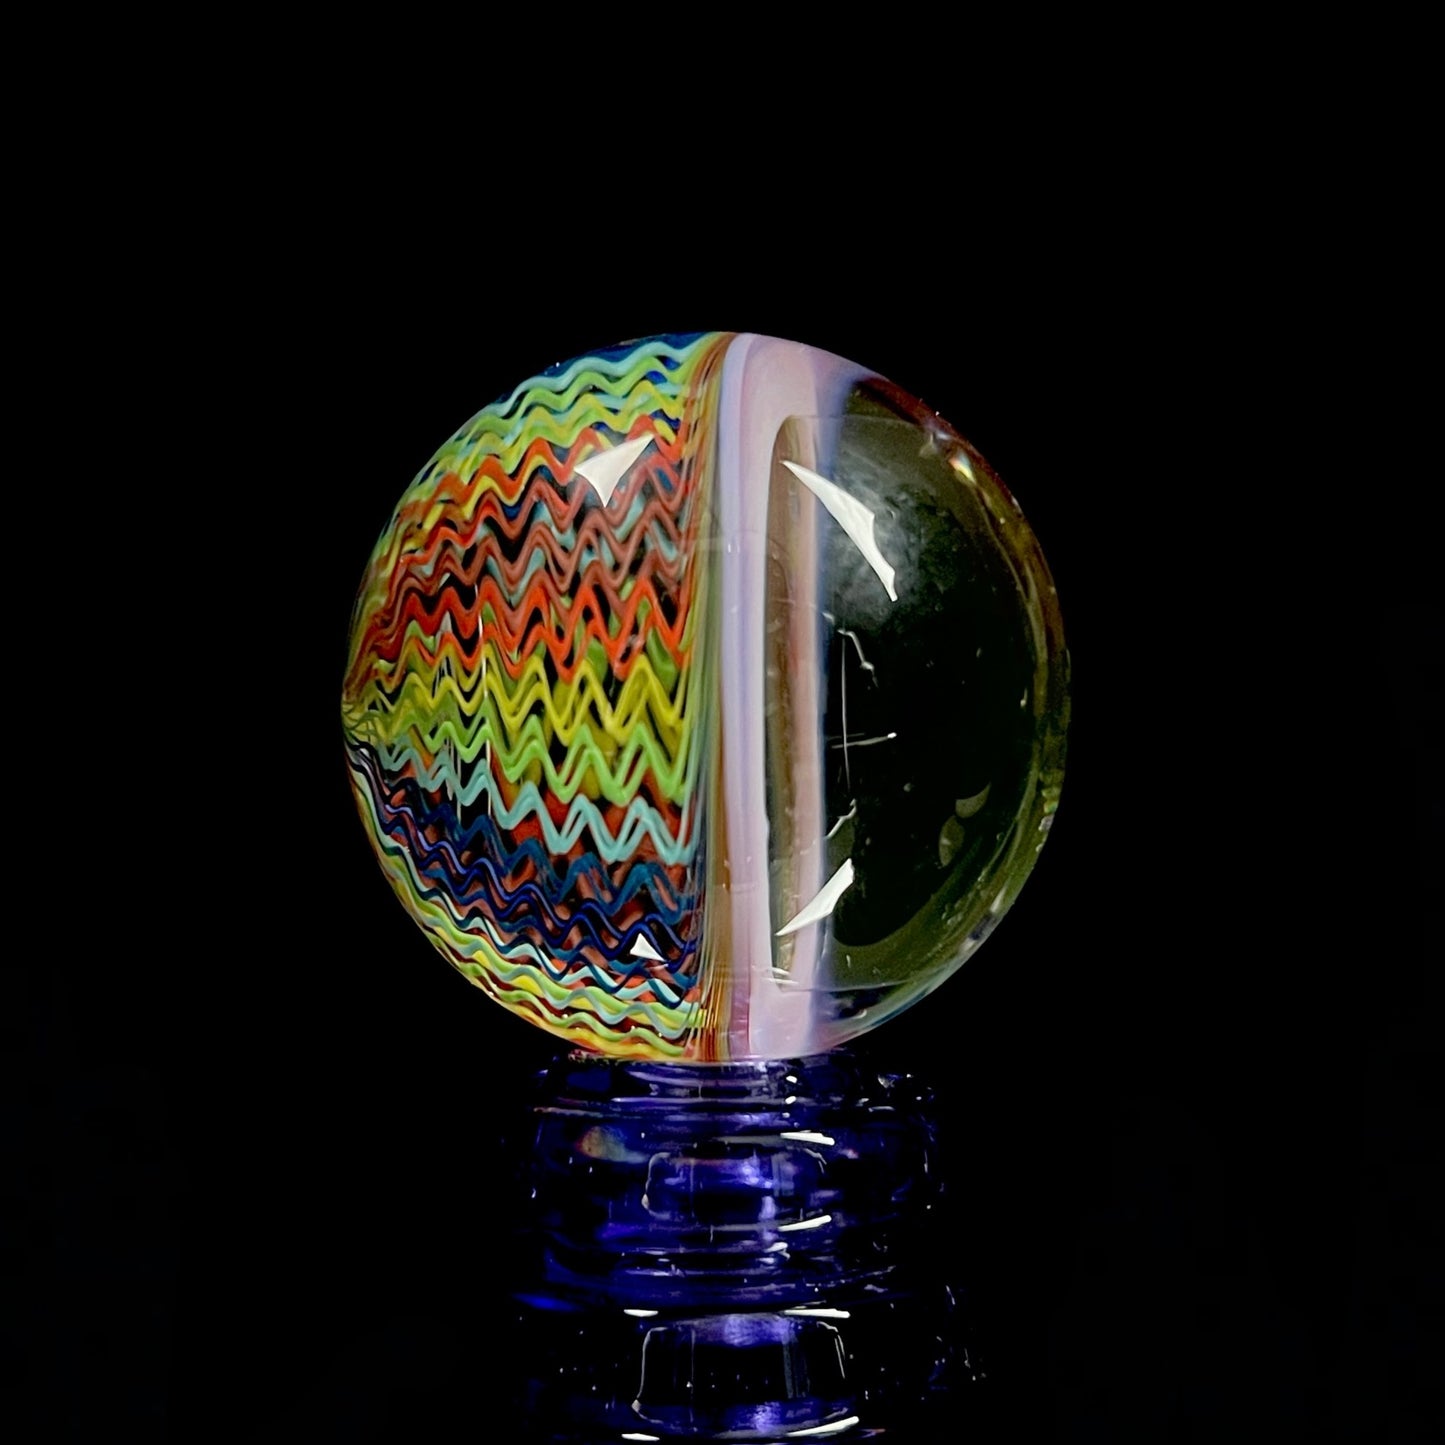 Rainbow Wig Wag marble by Jared Wetmore